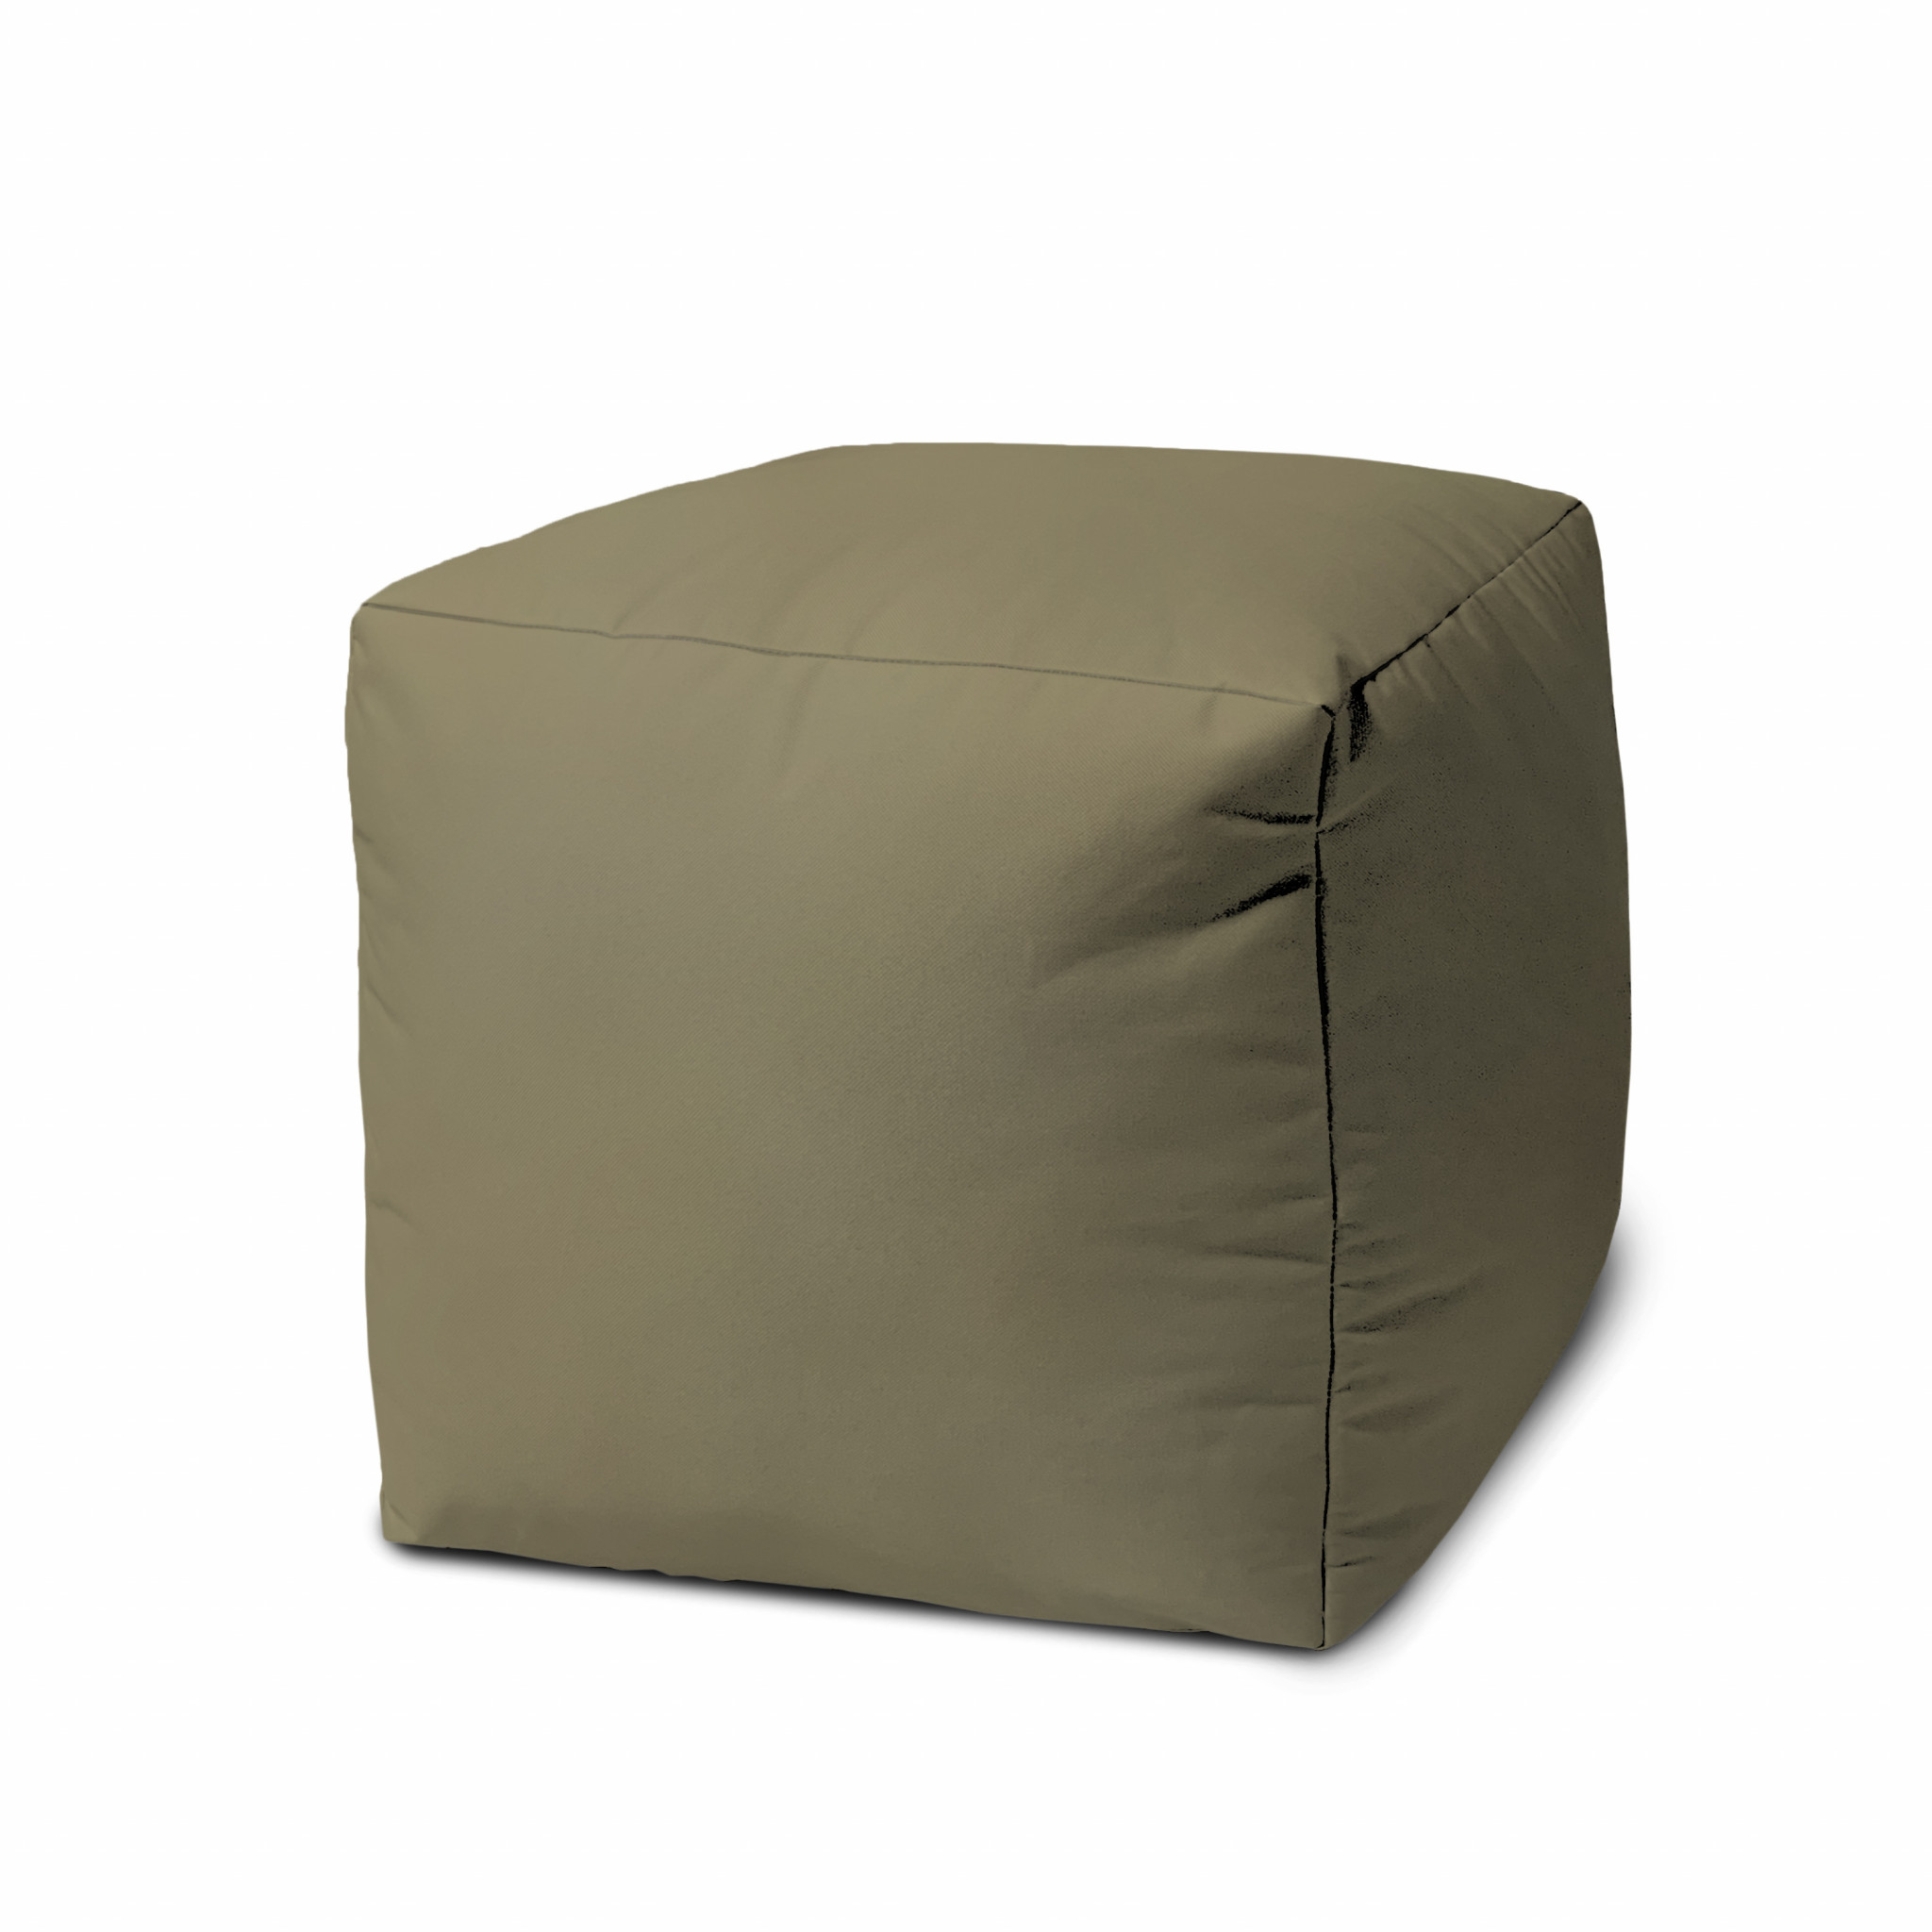 17 Cool Dark Tan Khaki Solid Color Indoor Outdoor Pouf Cover